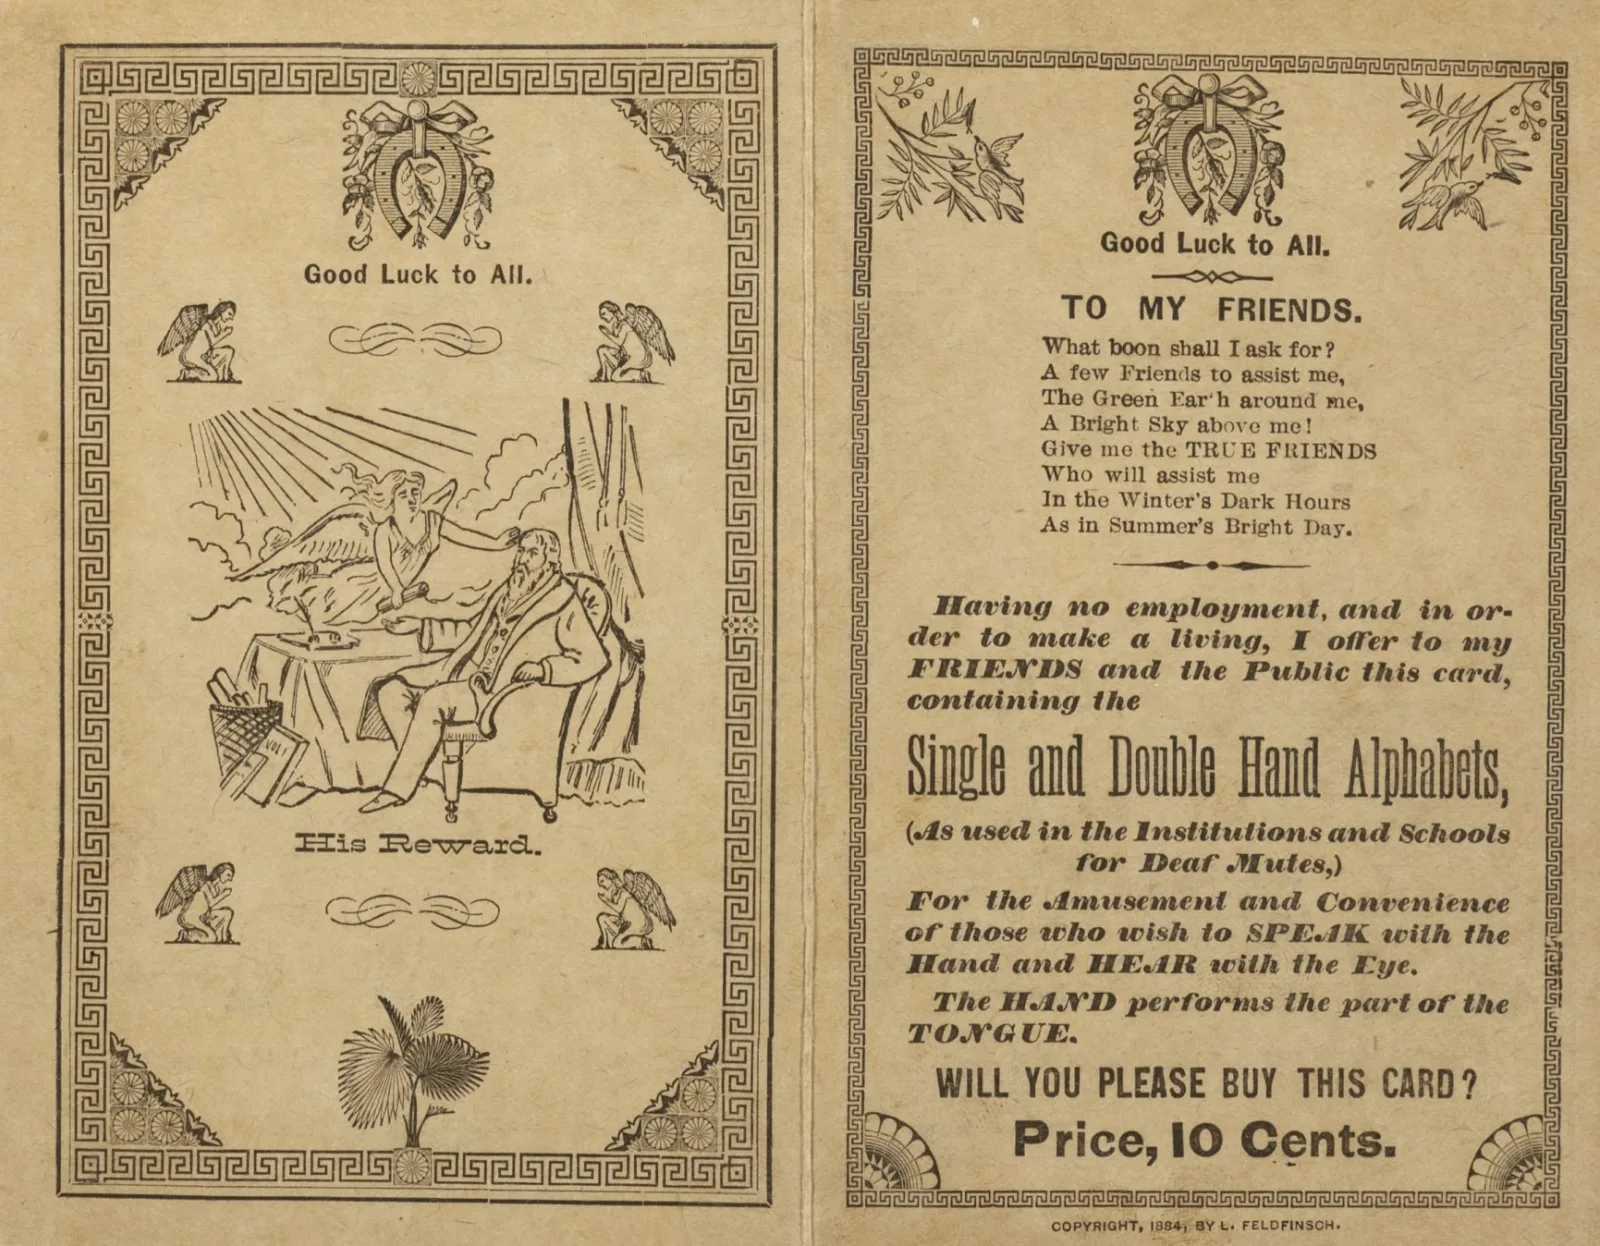 The headings "Good Luck to All," "To My Friends," and "Single and Double Hand Alphabets" are on the front cover of the leaflet.